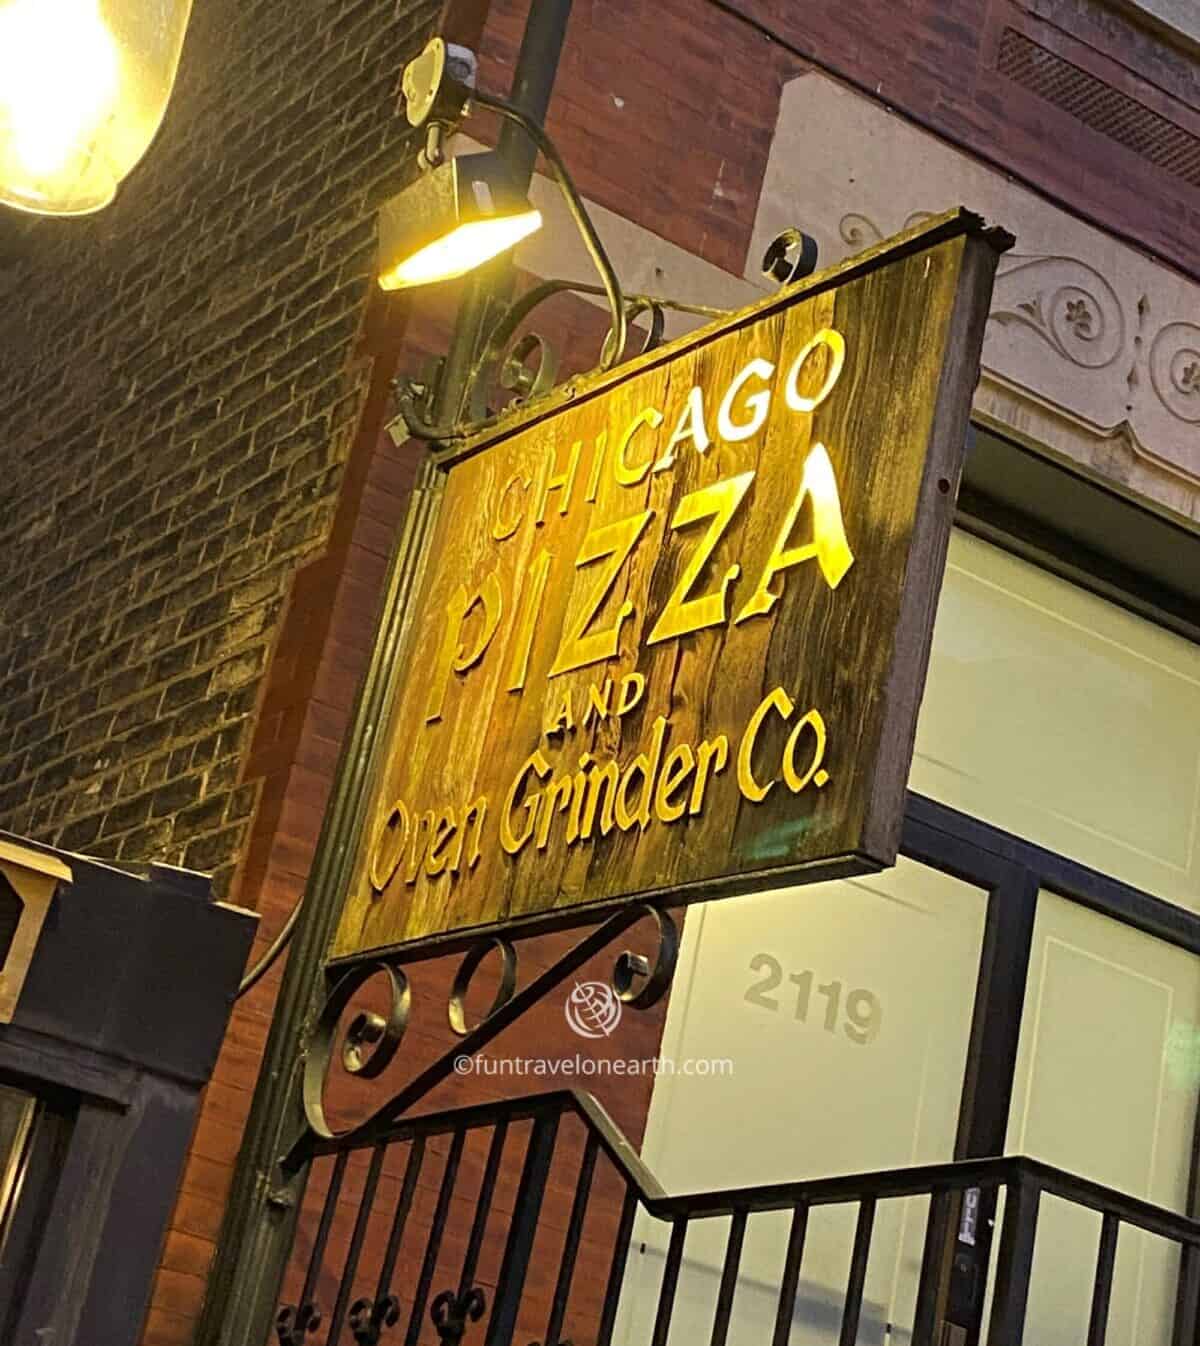 Chicago Pizza and Oven Grinder Company, Chicago, USA